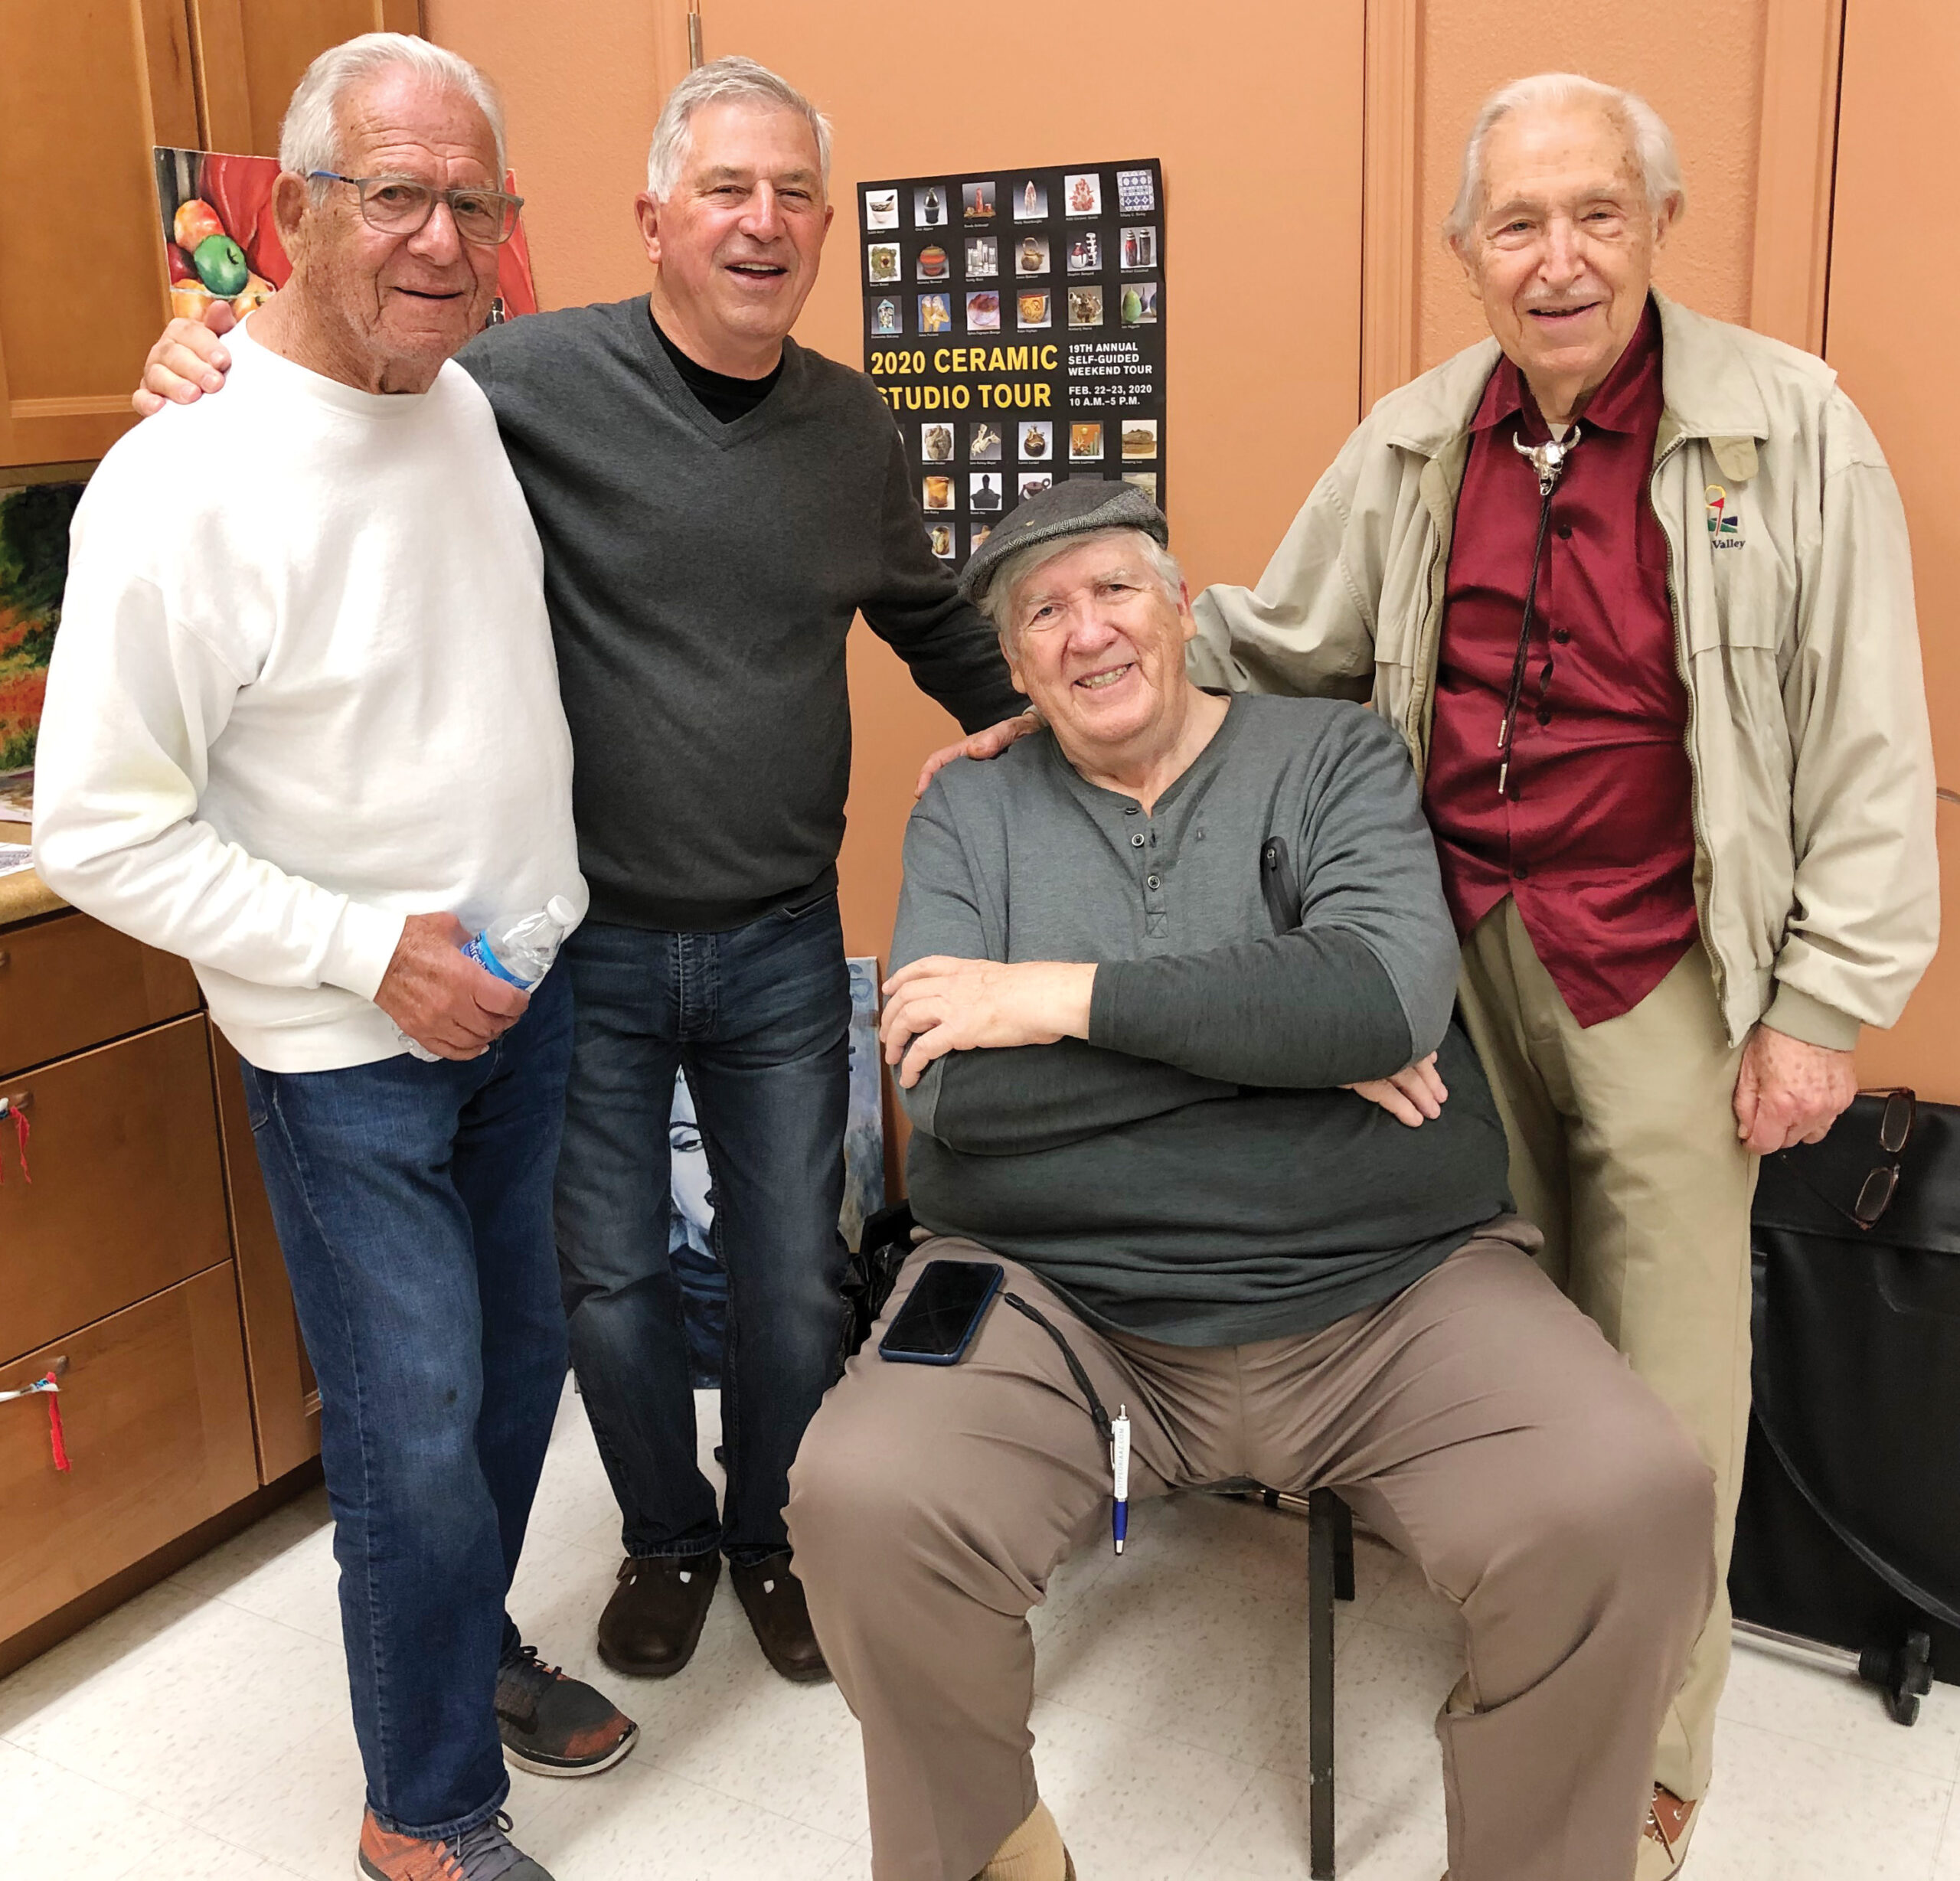 DAC artists and friends (left to right): Sid, Chuck, Maynard, and Joe